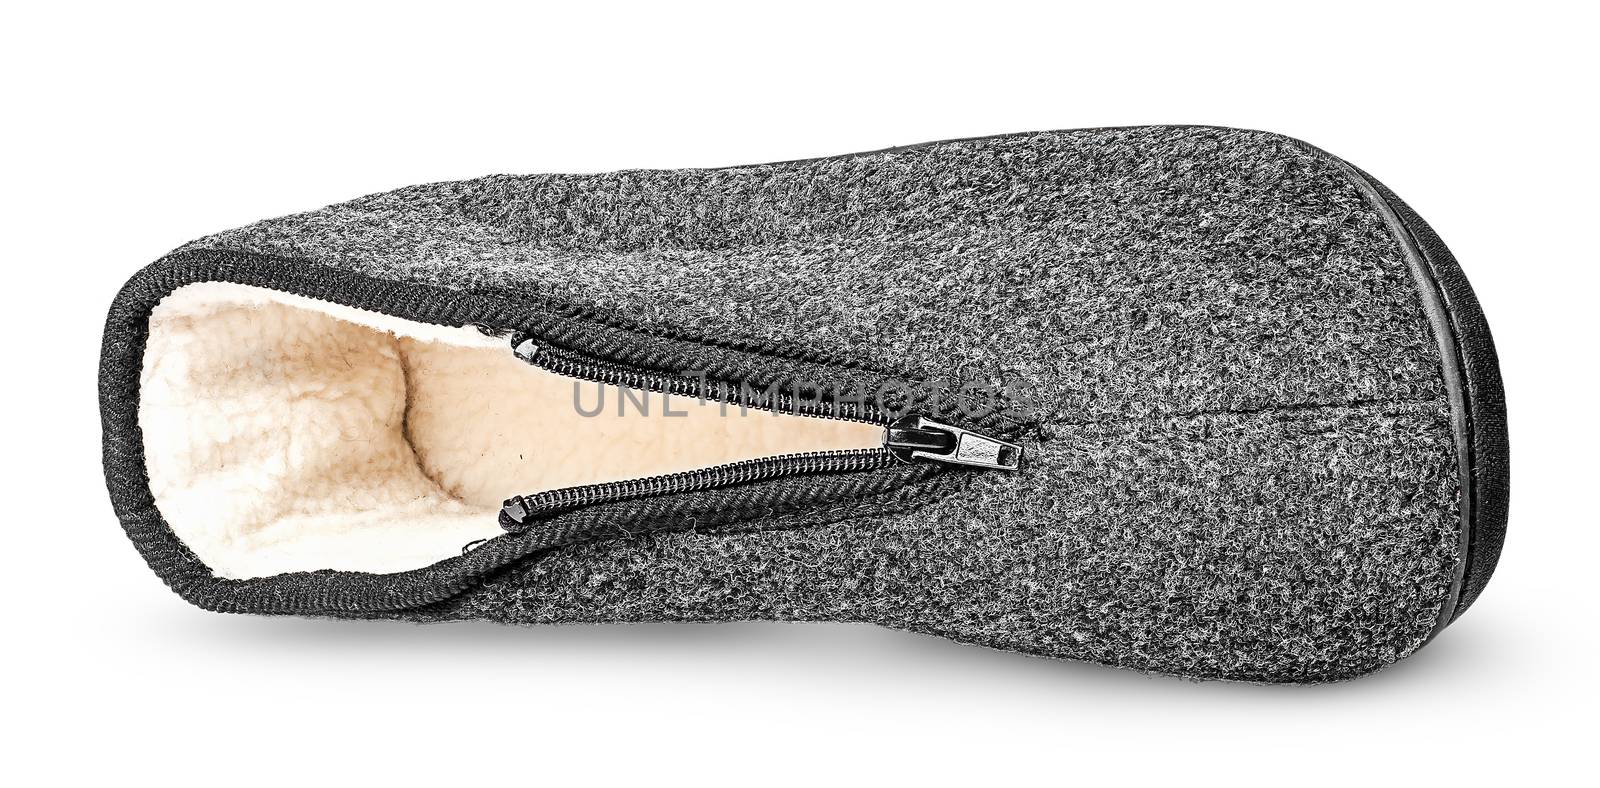 One piece the comfortable dark gray slipper lying on the side isolated on white background